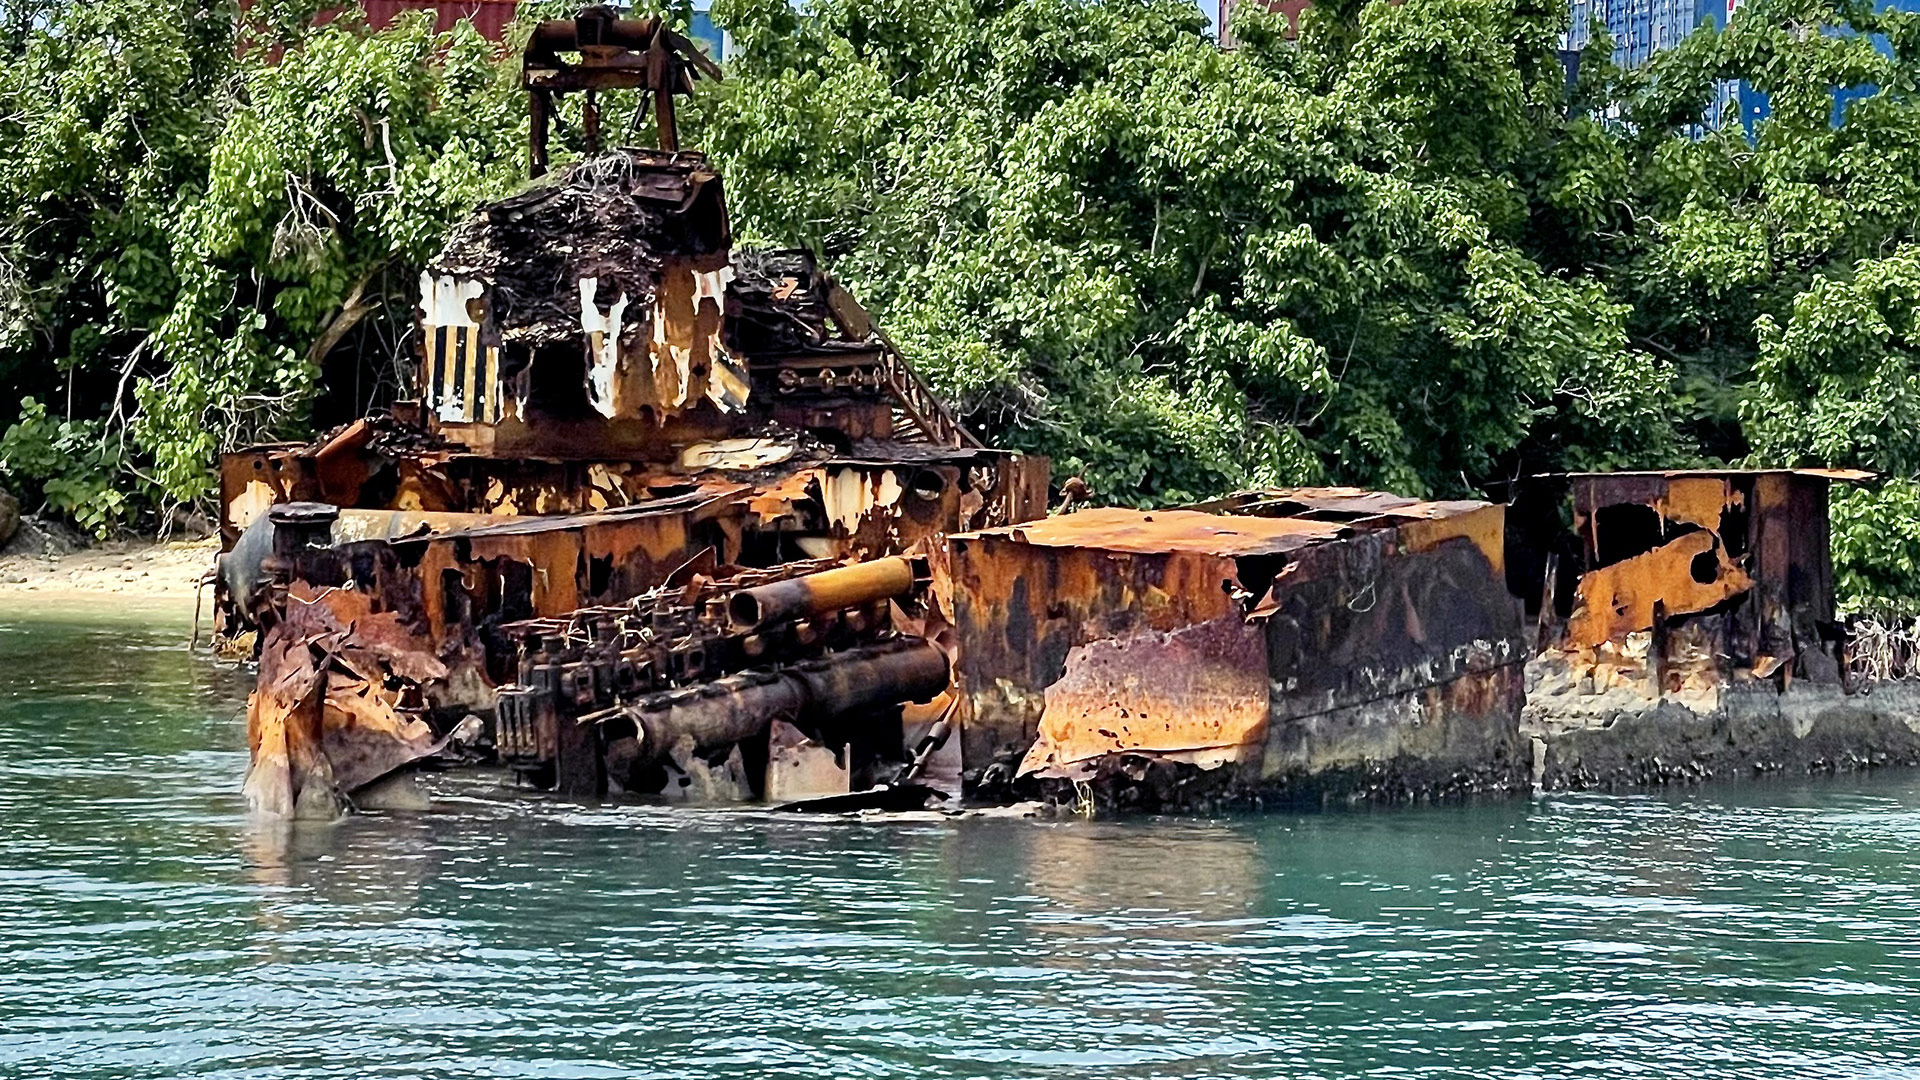 The remains of World War coal ship in Guam (photograph by Russell Worth Parker)